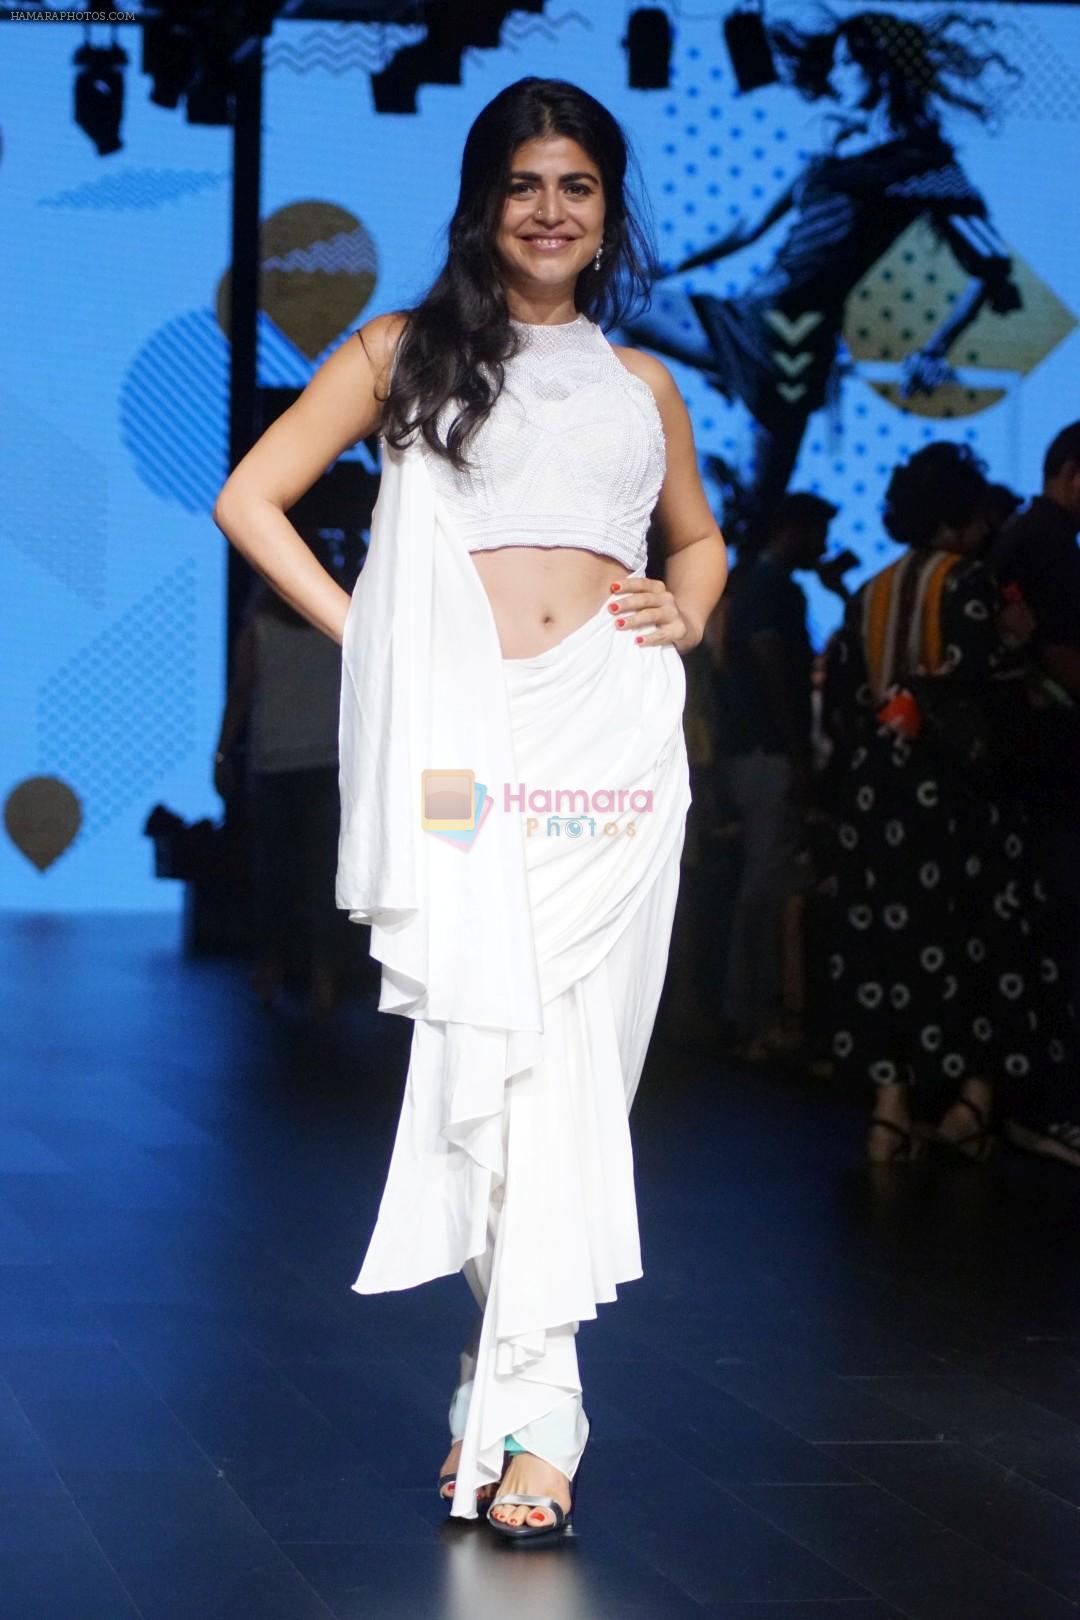 Shenaz Treasury As Guest At LFW Winter Festive 2017 on 20th Aug 2017